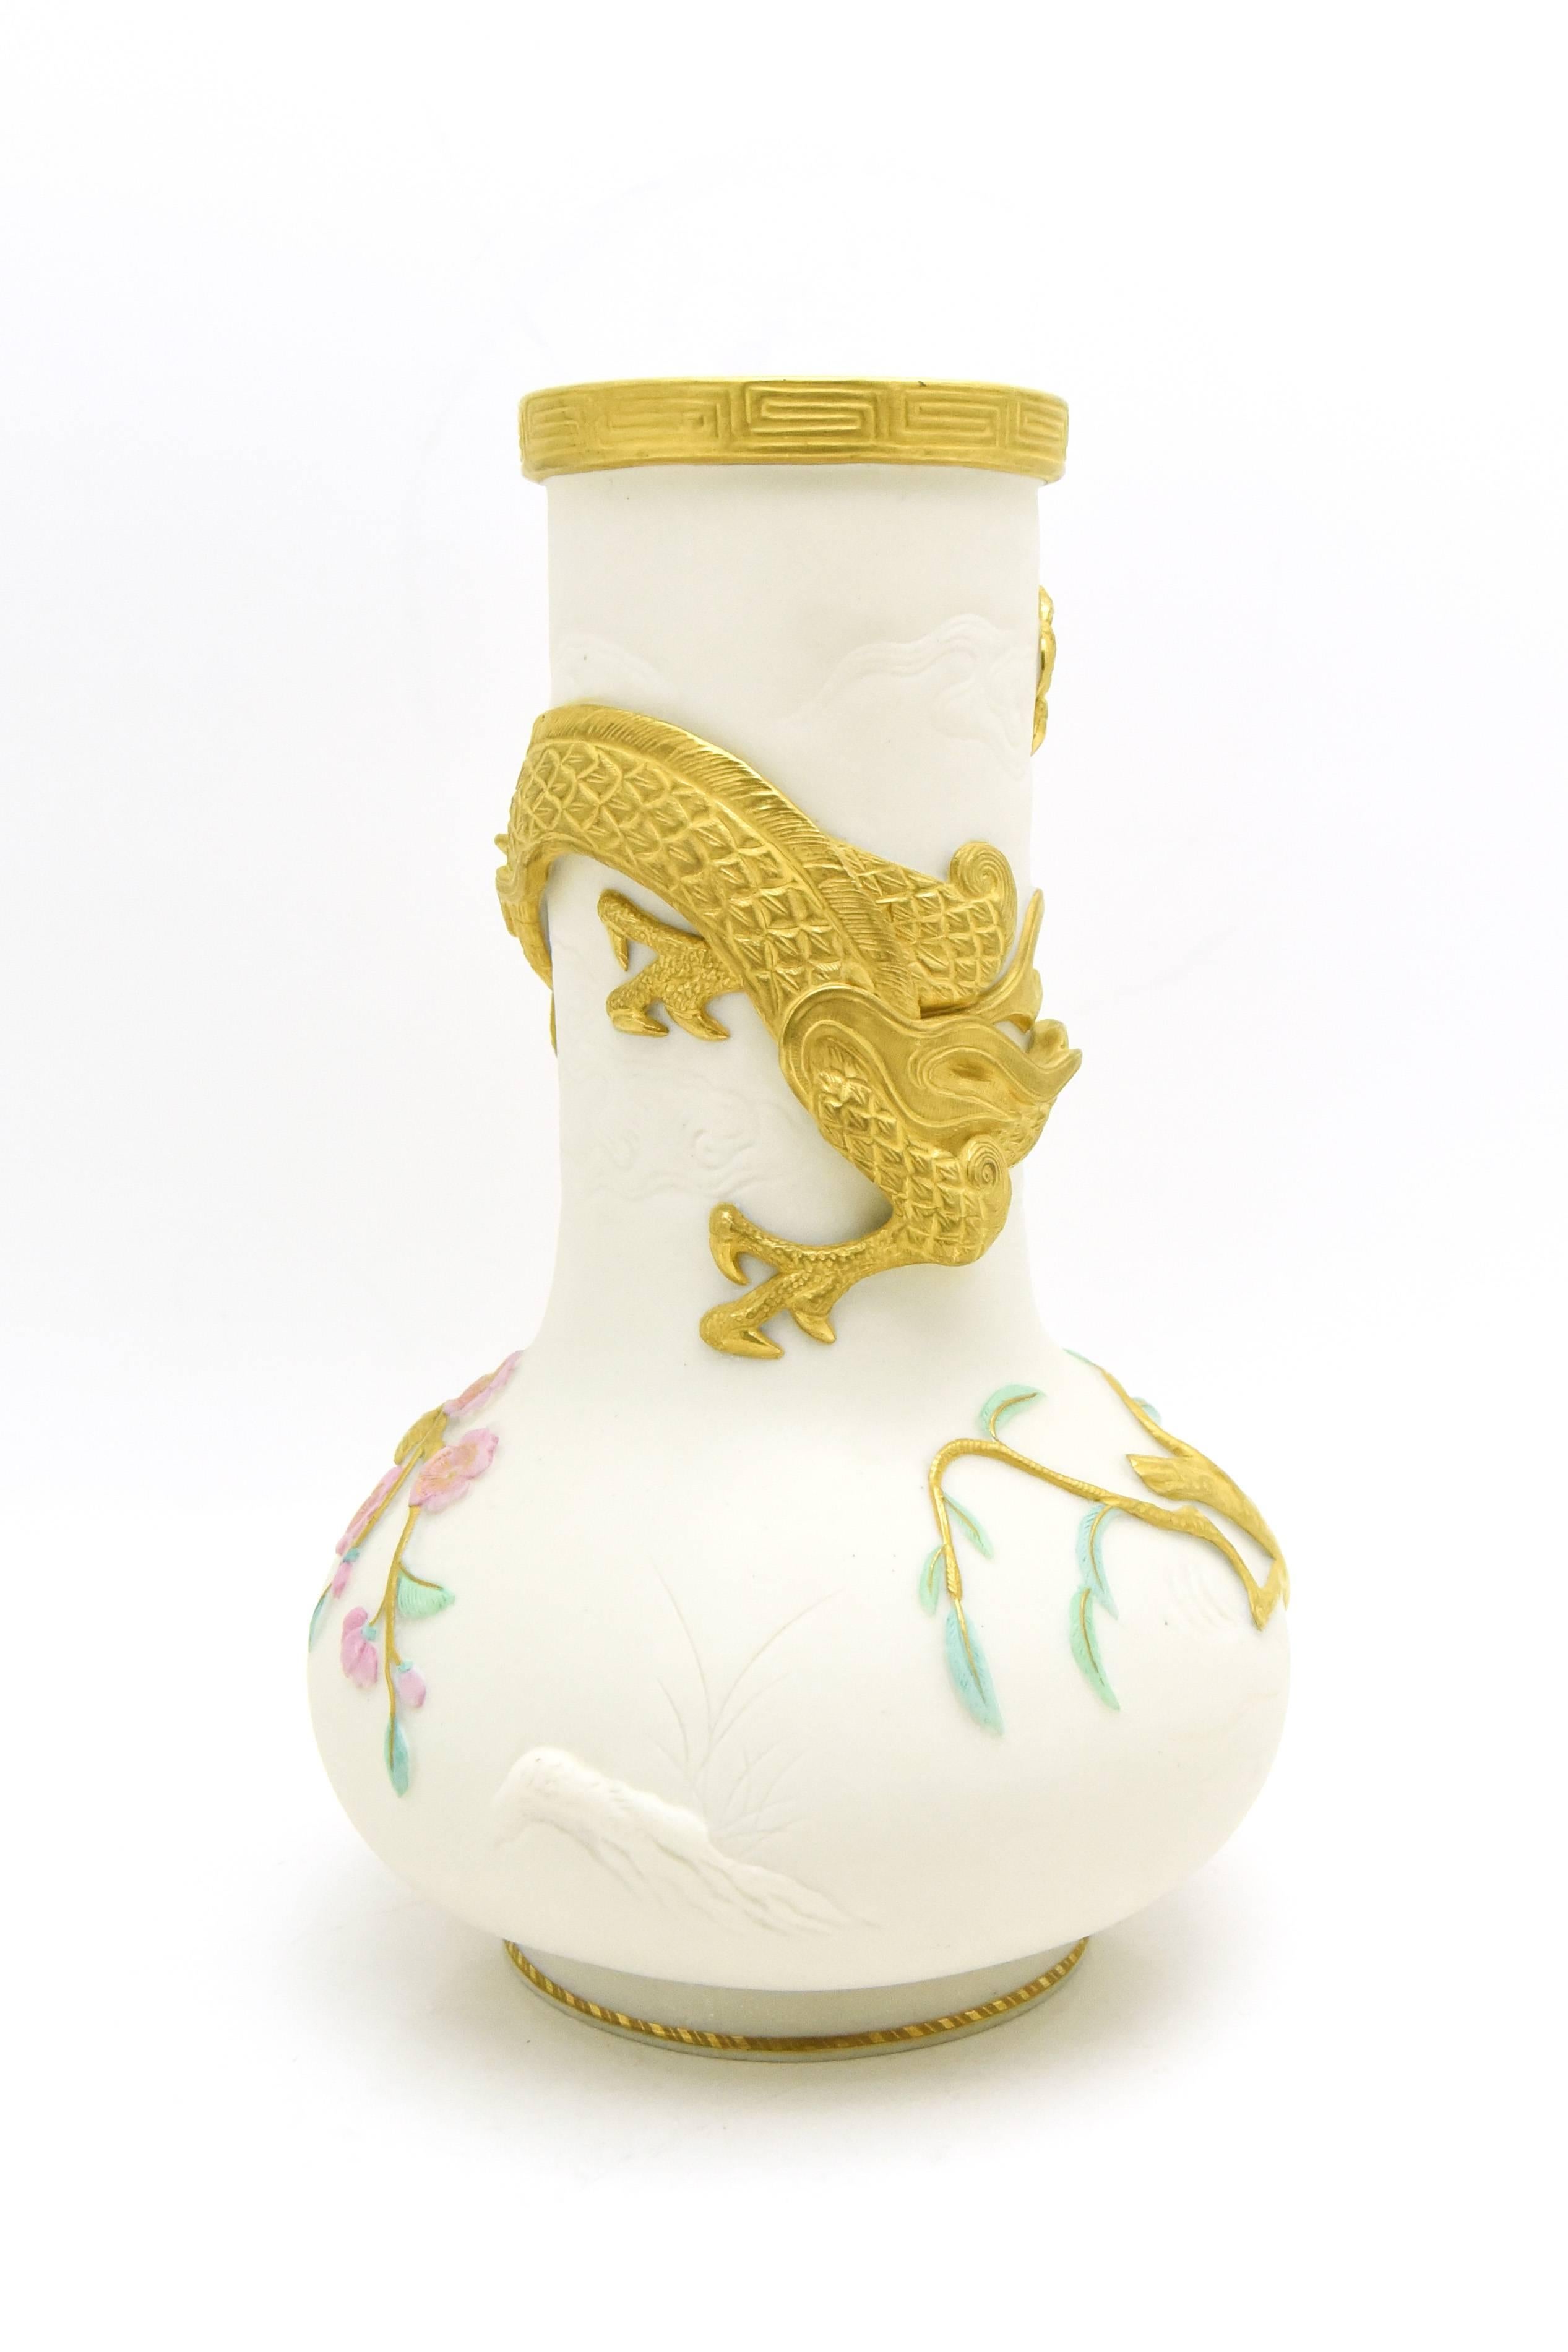 Aesthetic Movement Pair of Copeland Japonesque Vases with Gold Dragons, Birds & Cherry Blossoms